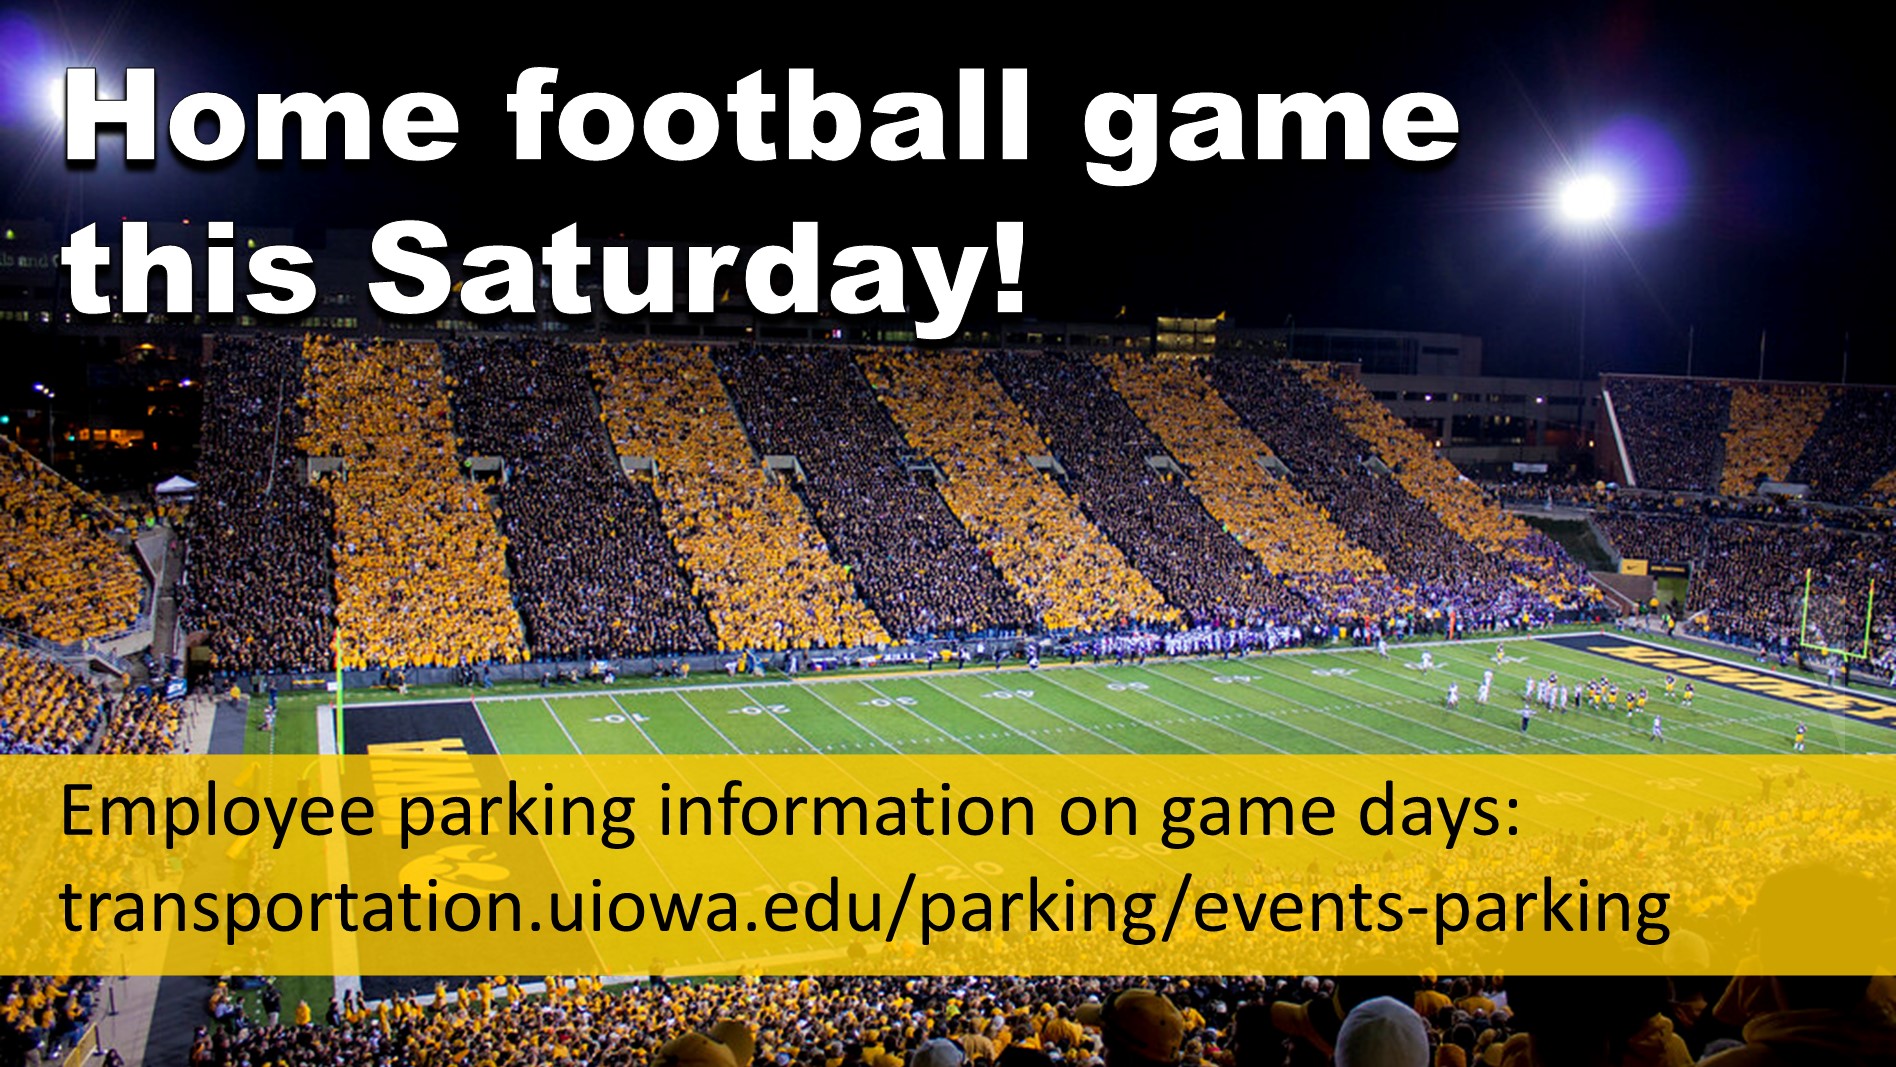 employee parking on home football game days